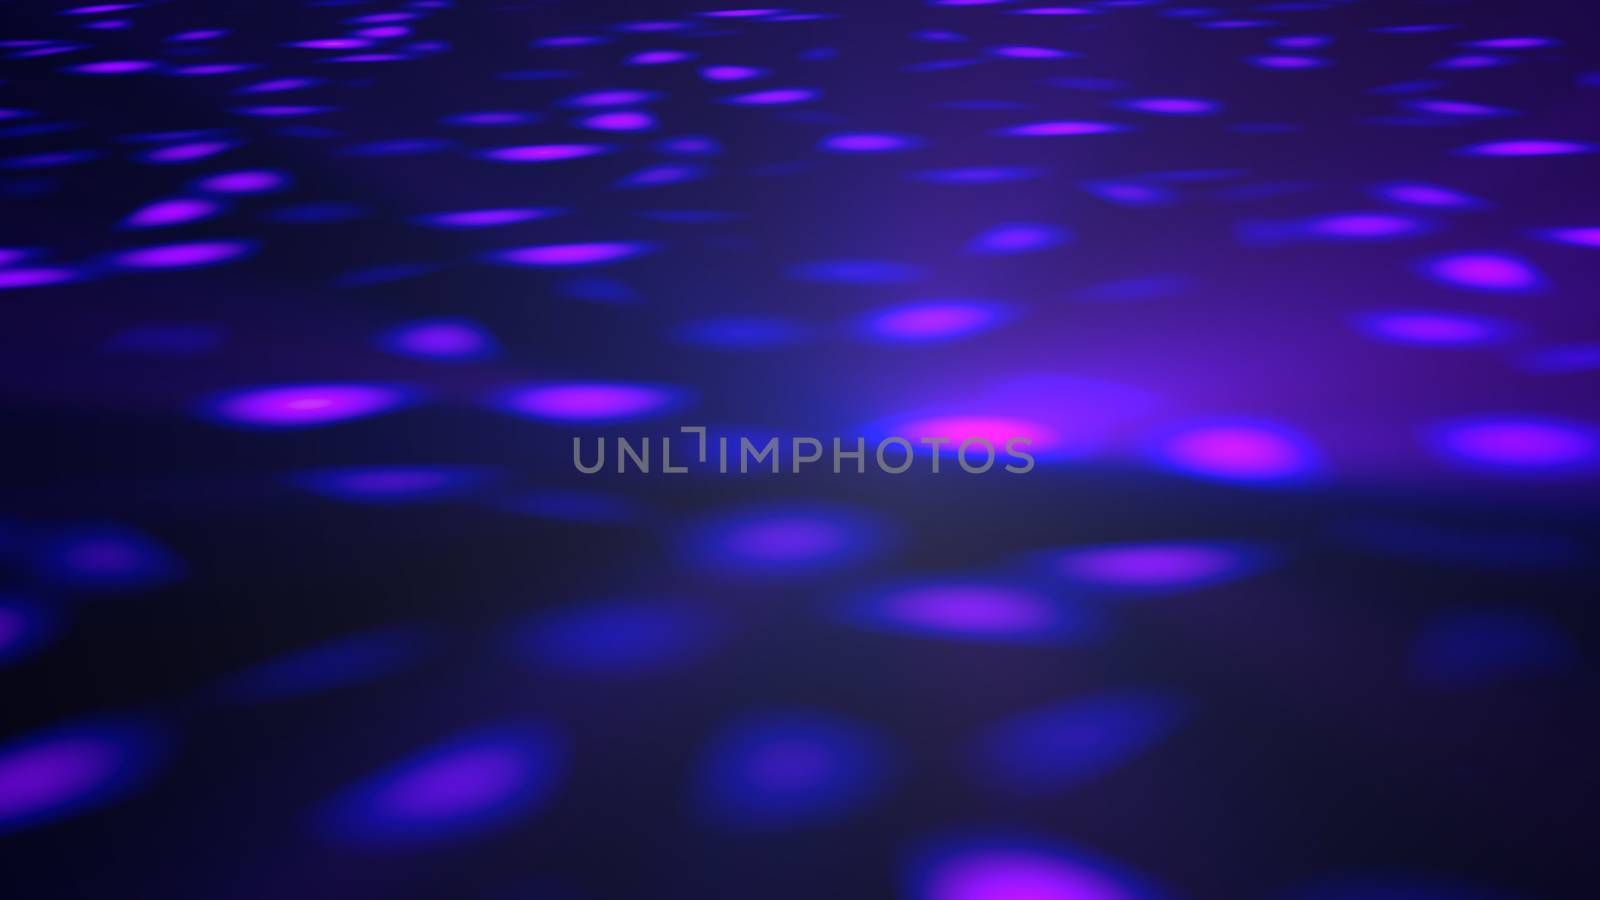 Abstract background with disco floor. 3d rendering